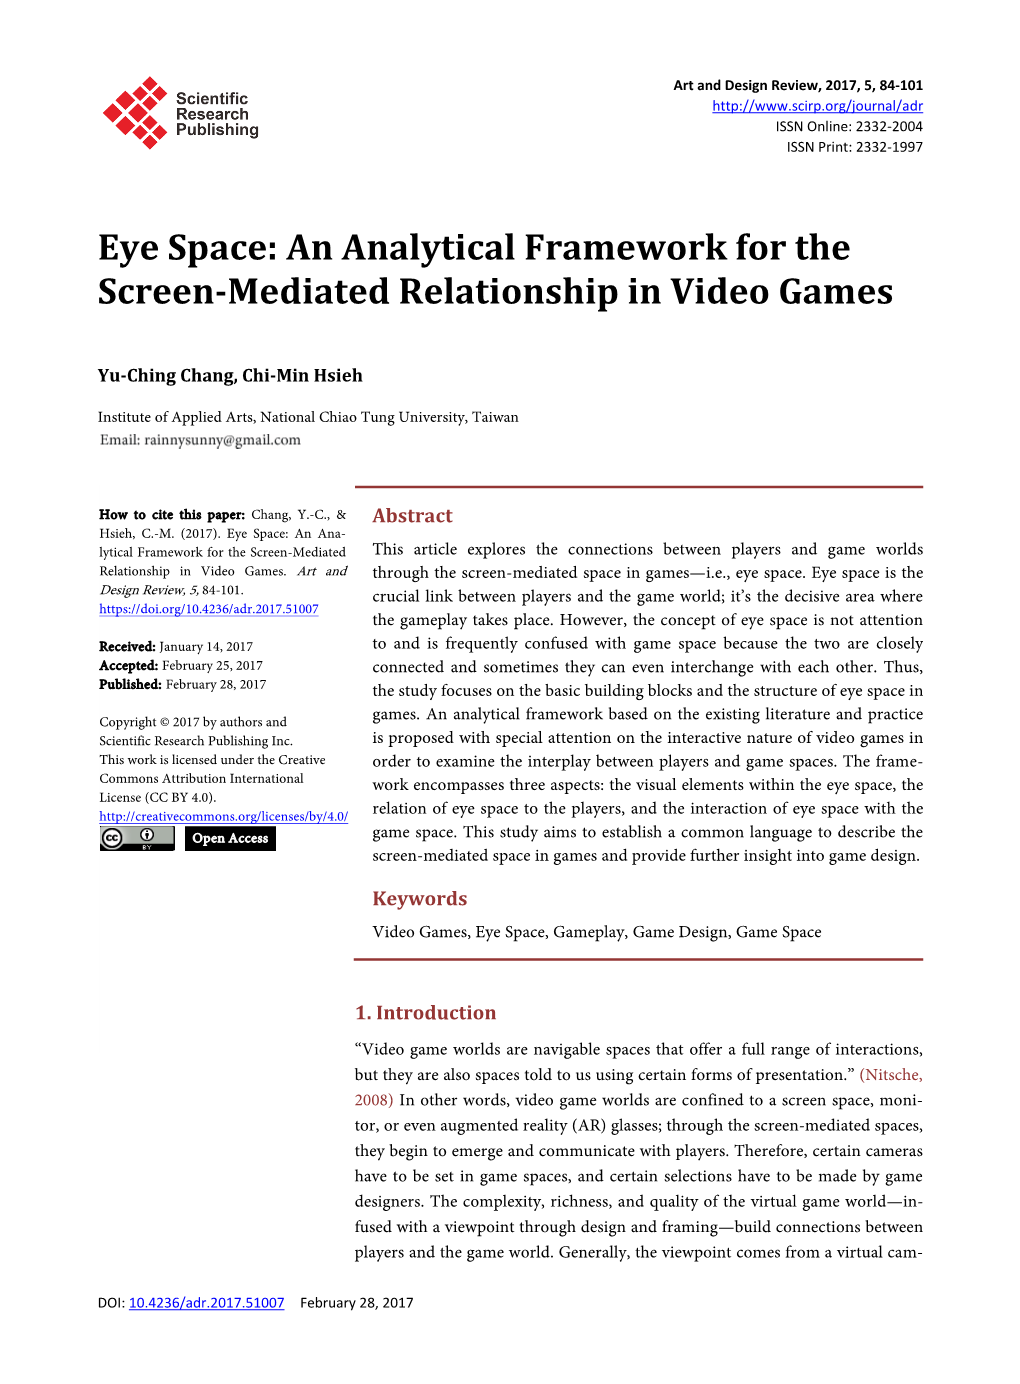 Eye Space: an Analytical Framework for the Screen-Mediated Relationship in Video Games